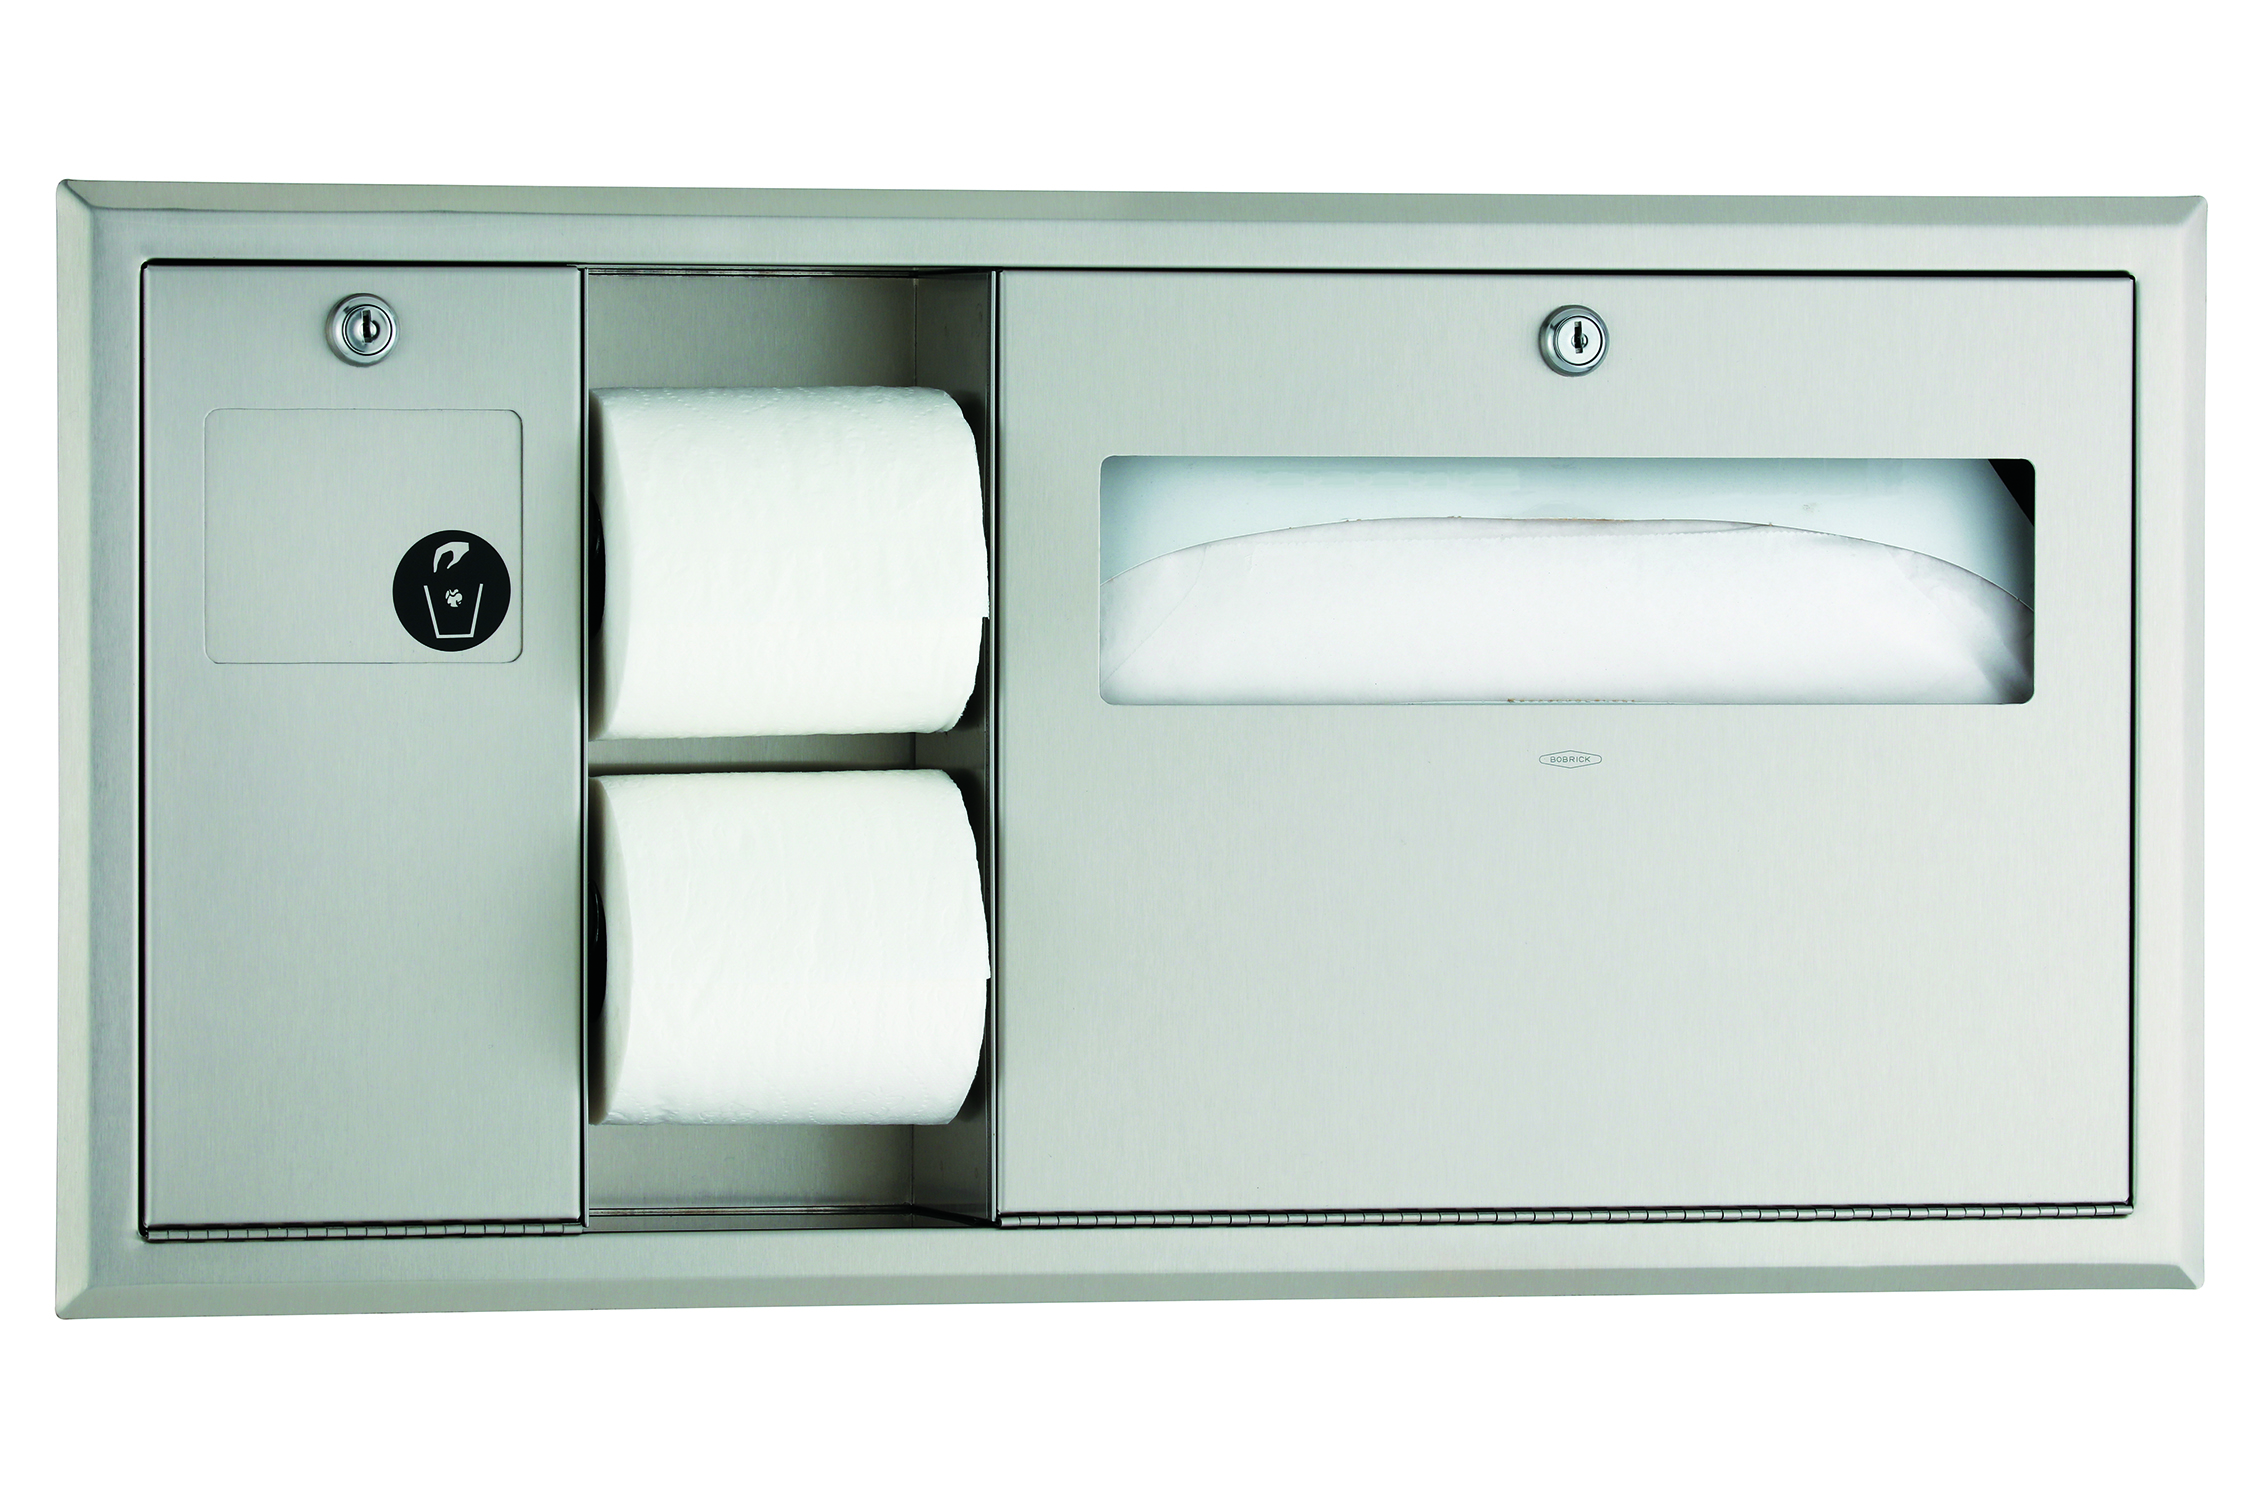 Recessed-Mounted Toilet Tissue, Seat-Cover Dispenser and Waste Disposal Image